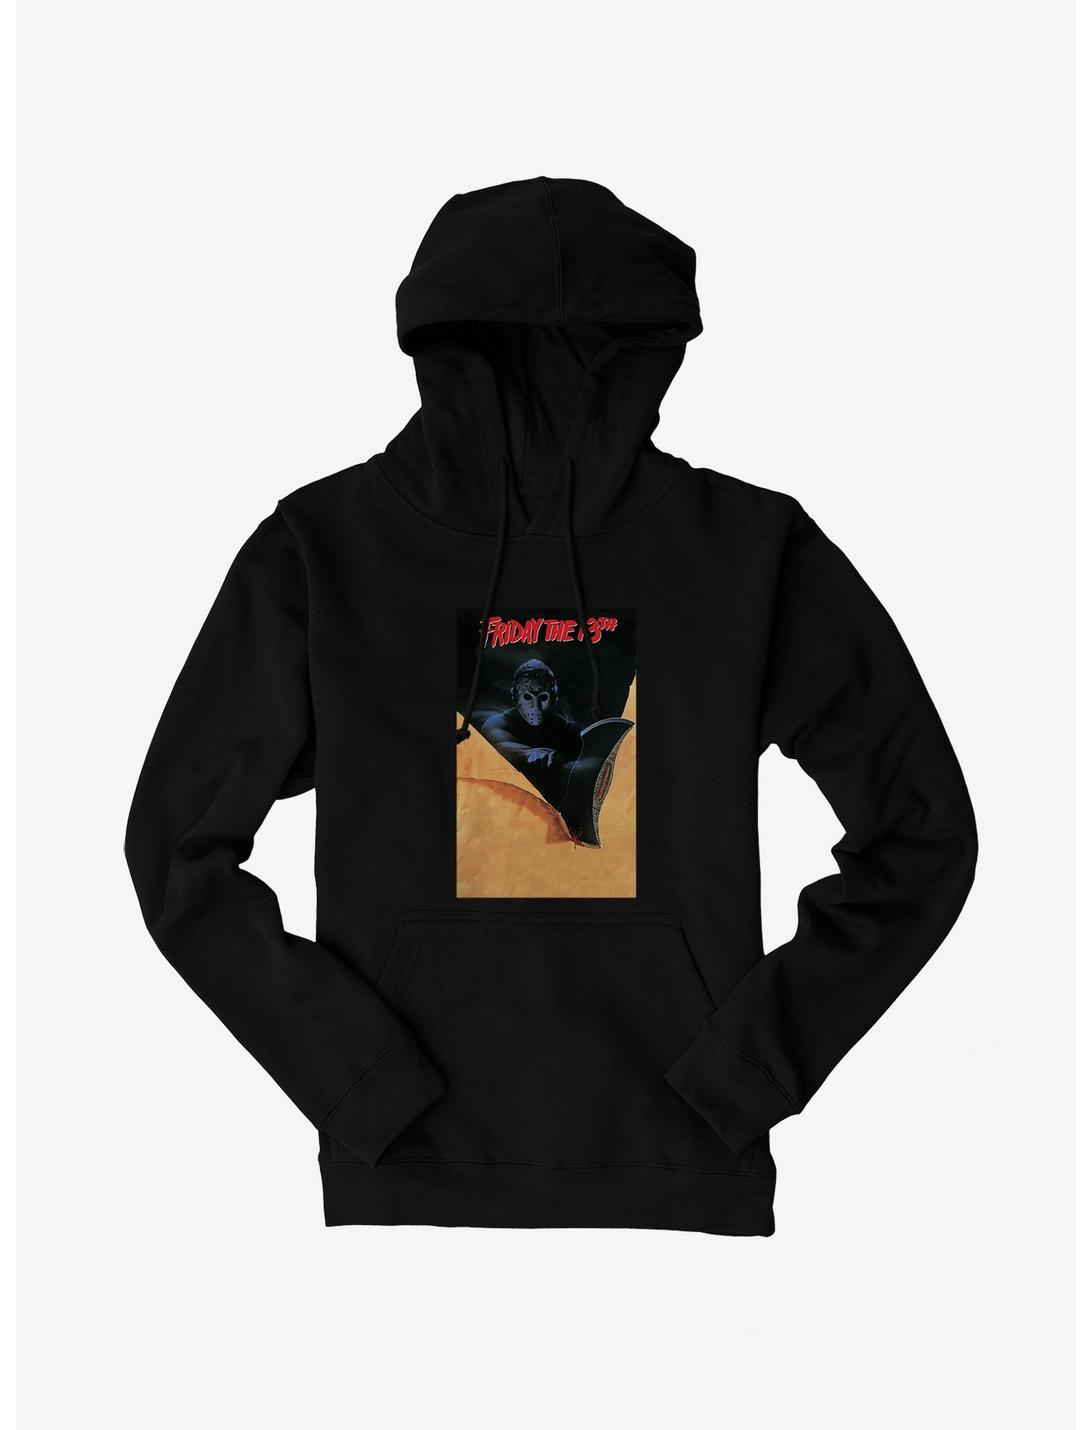 Friday The 13th Poster Hoodie, BLACK, hi-res